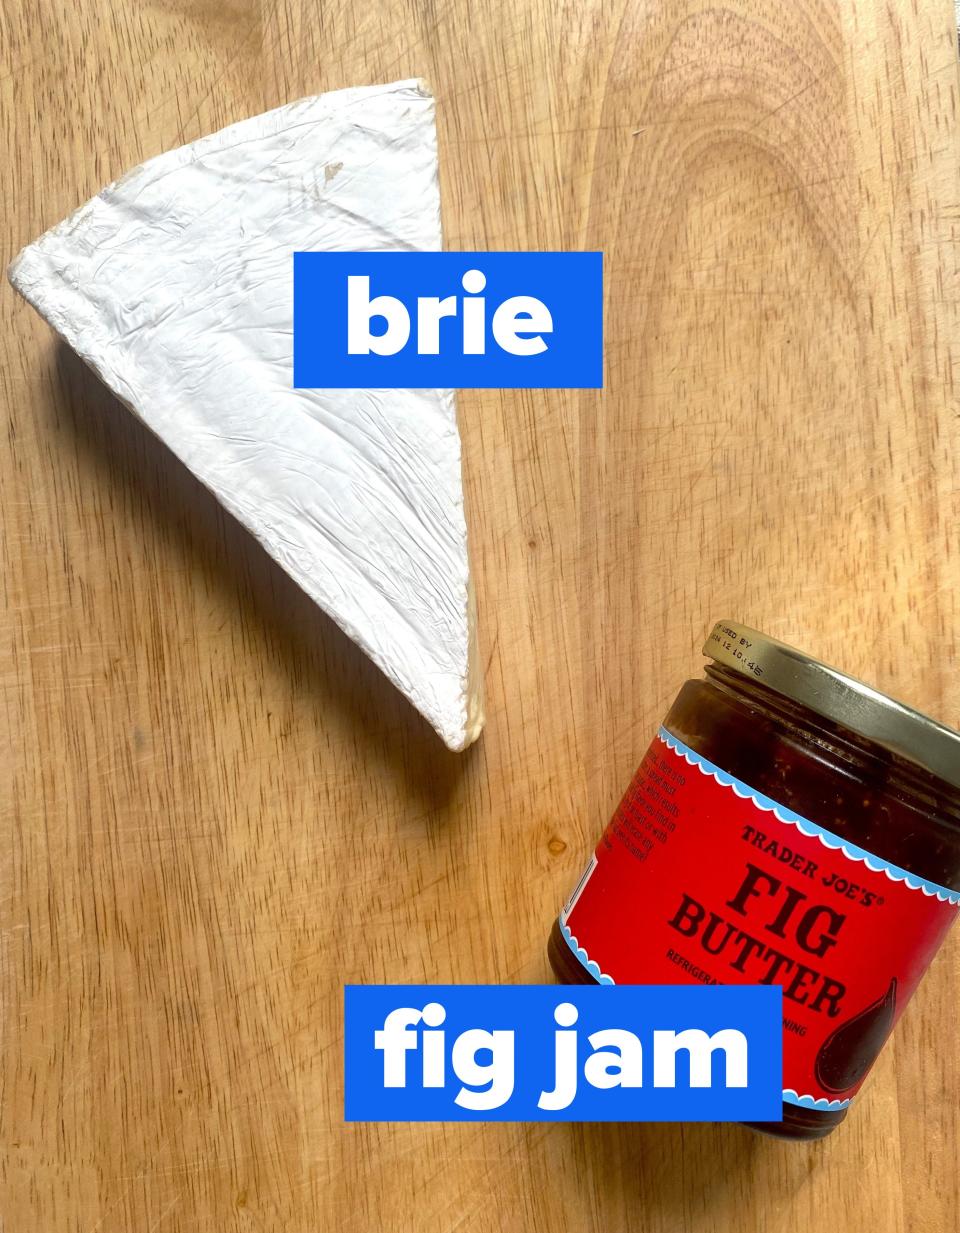 Brie and a jar of fig jam on a cutting board